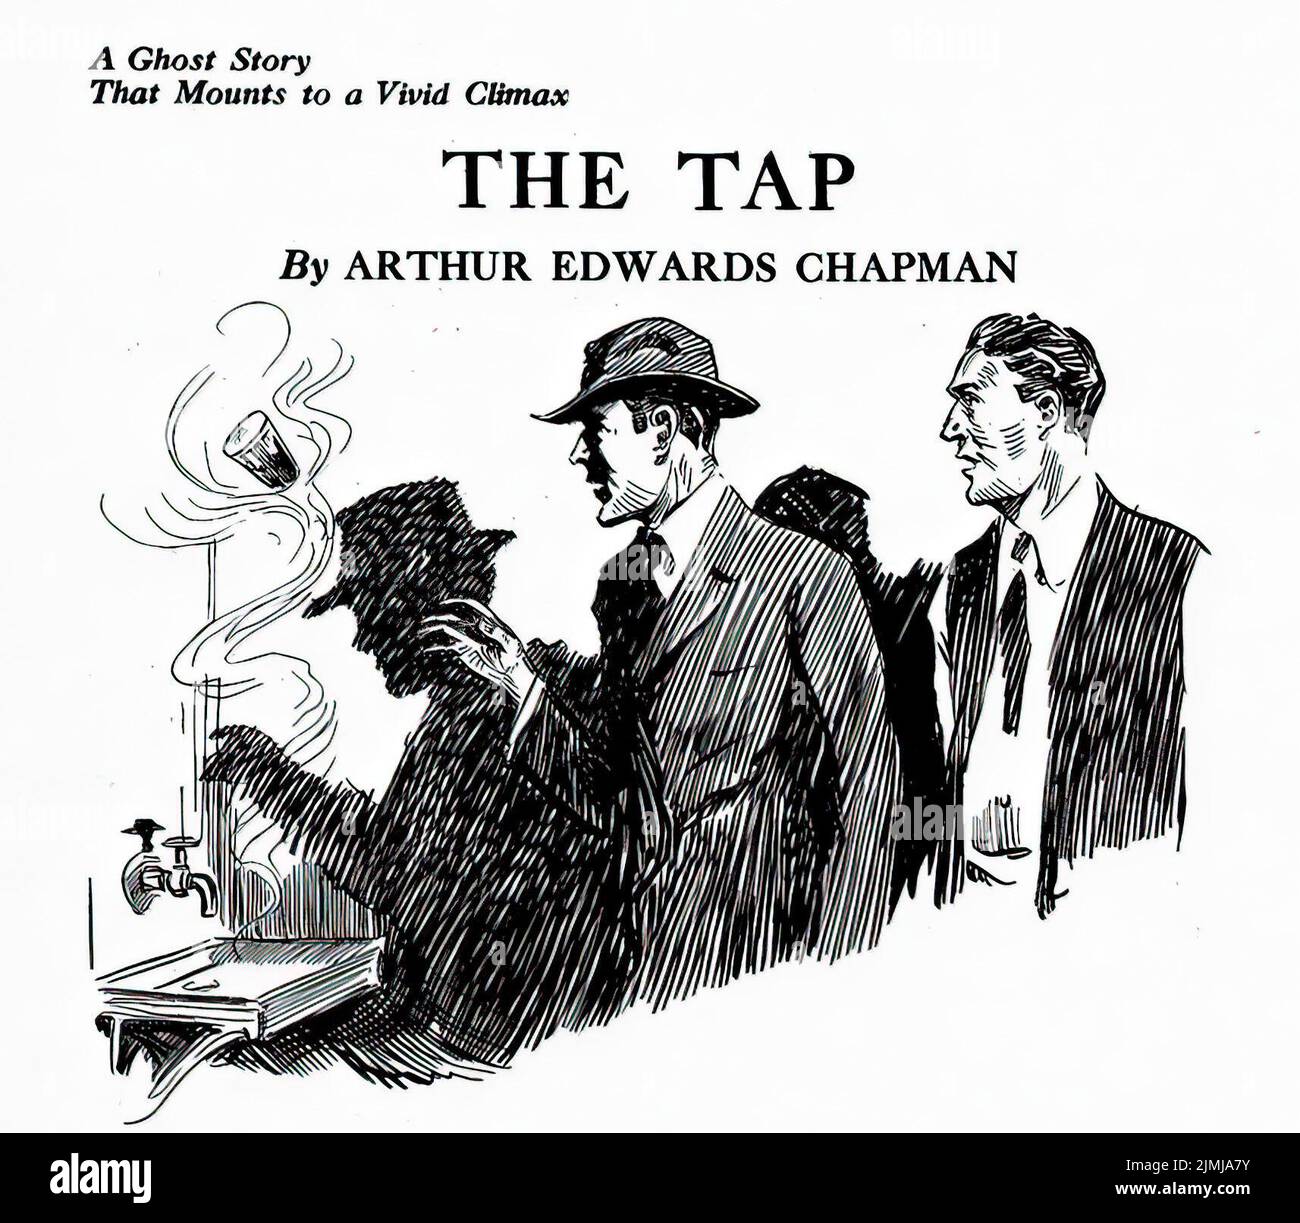 The Tap, by Arthur Edwards Chapman. Illustration from Weird Tales, February 1924 Stock Photo